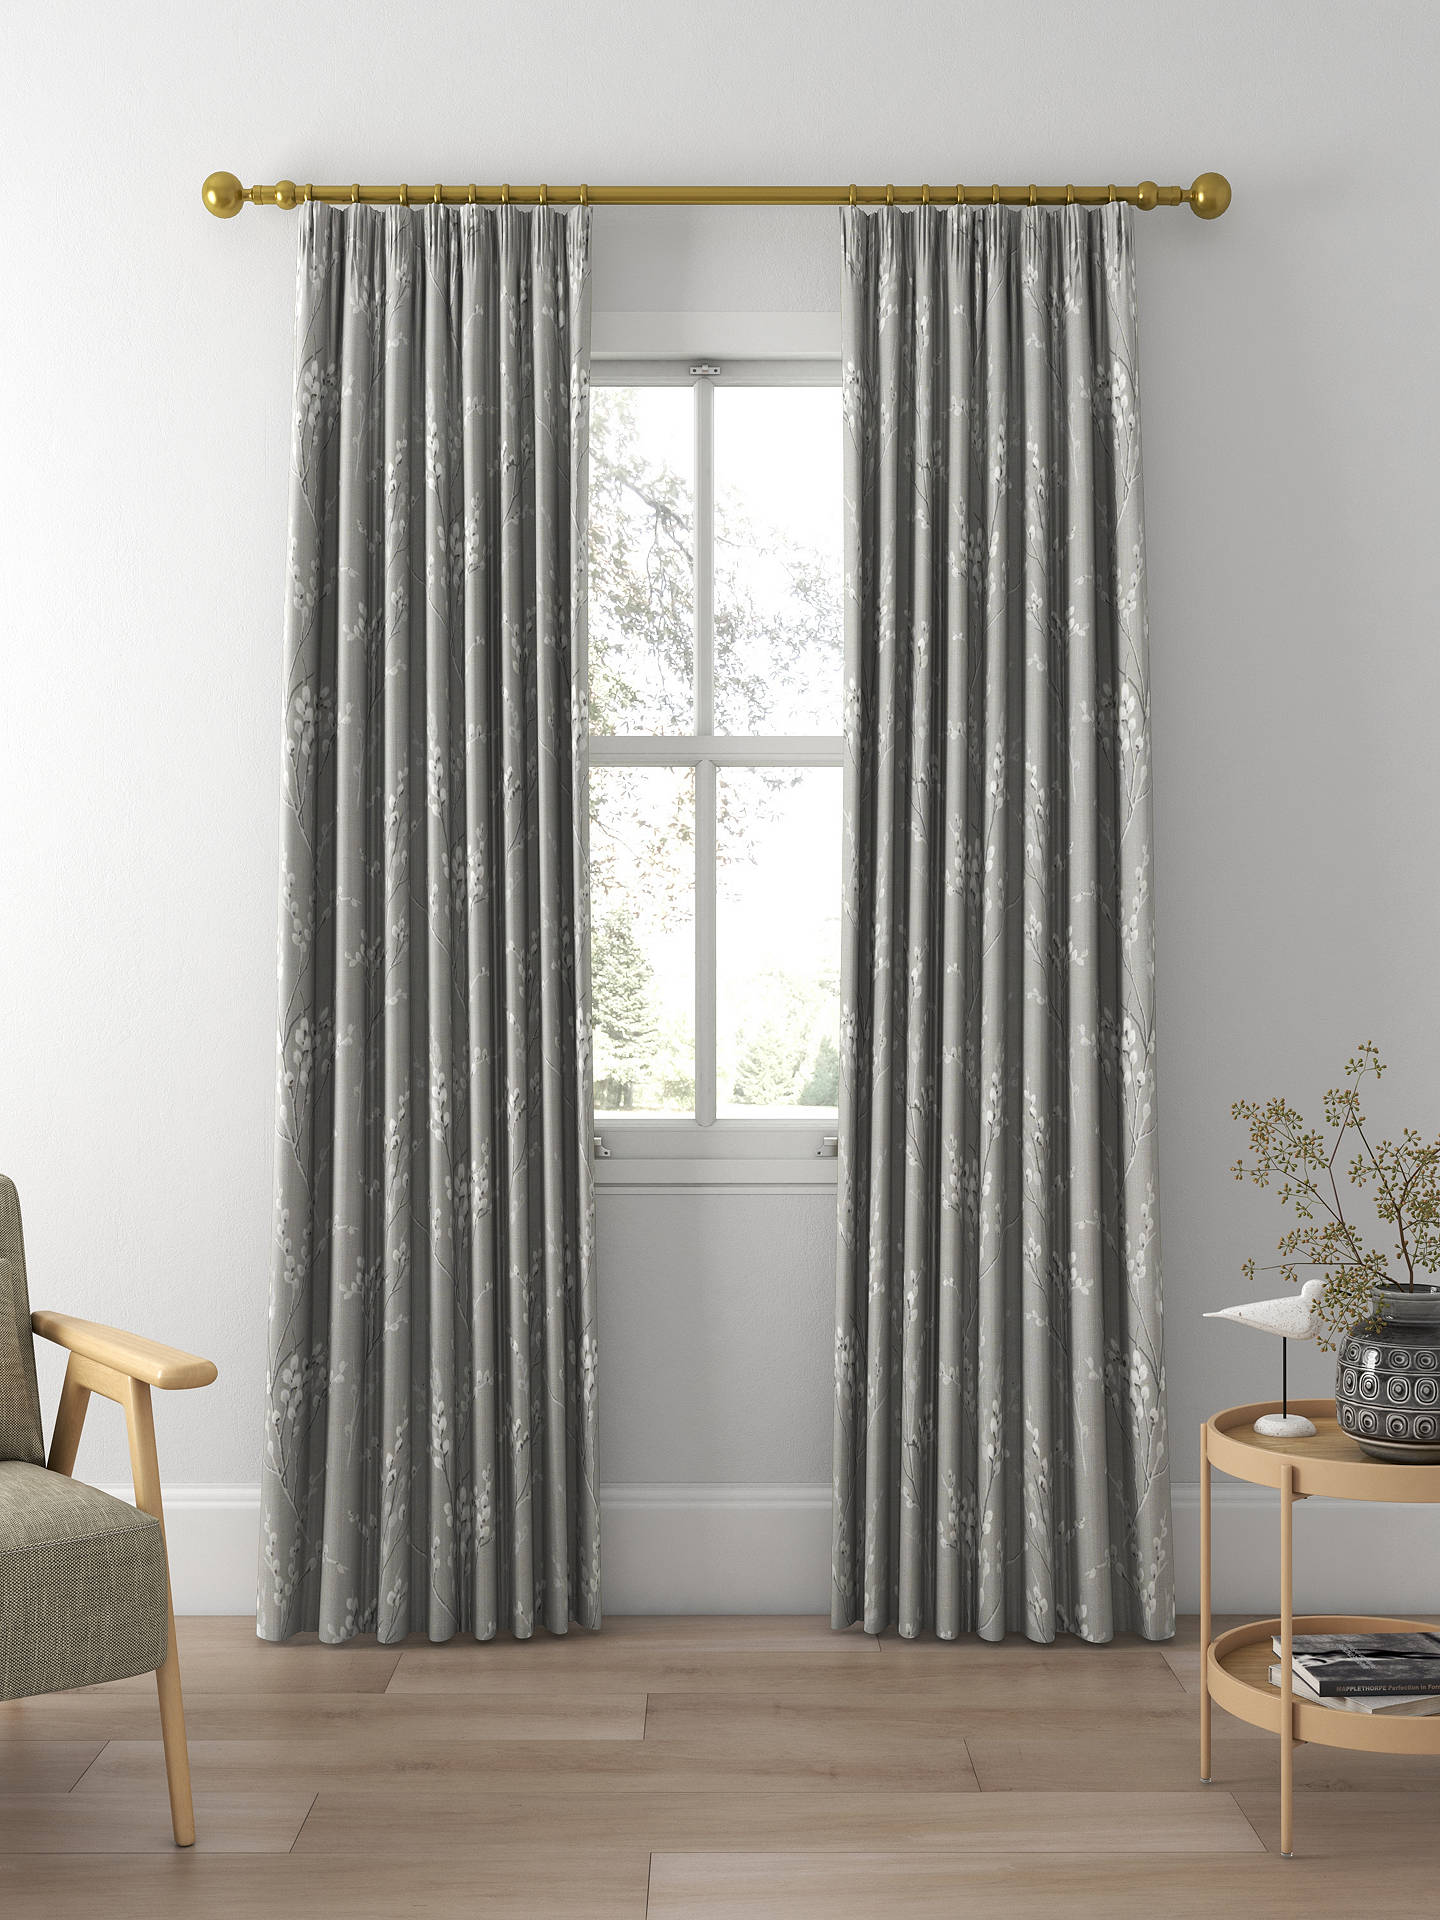 Laura Ashley Pussy Willow Made to Measure Curtains, Steel